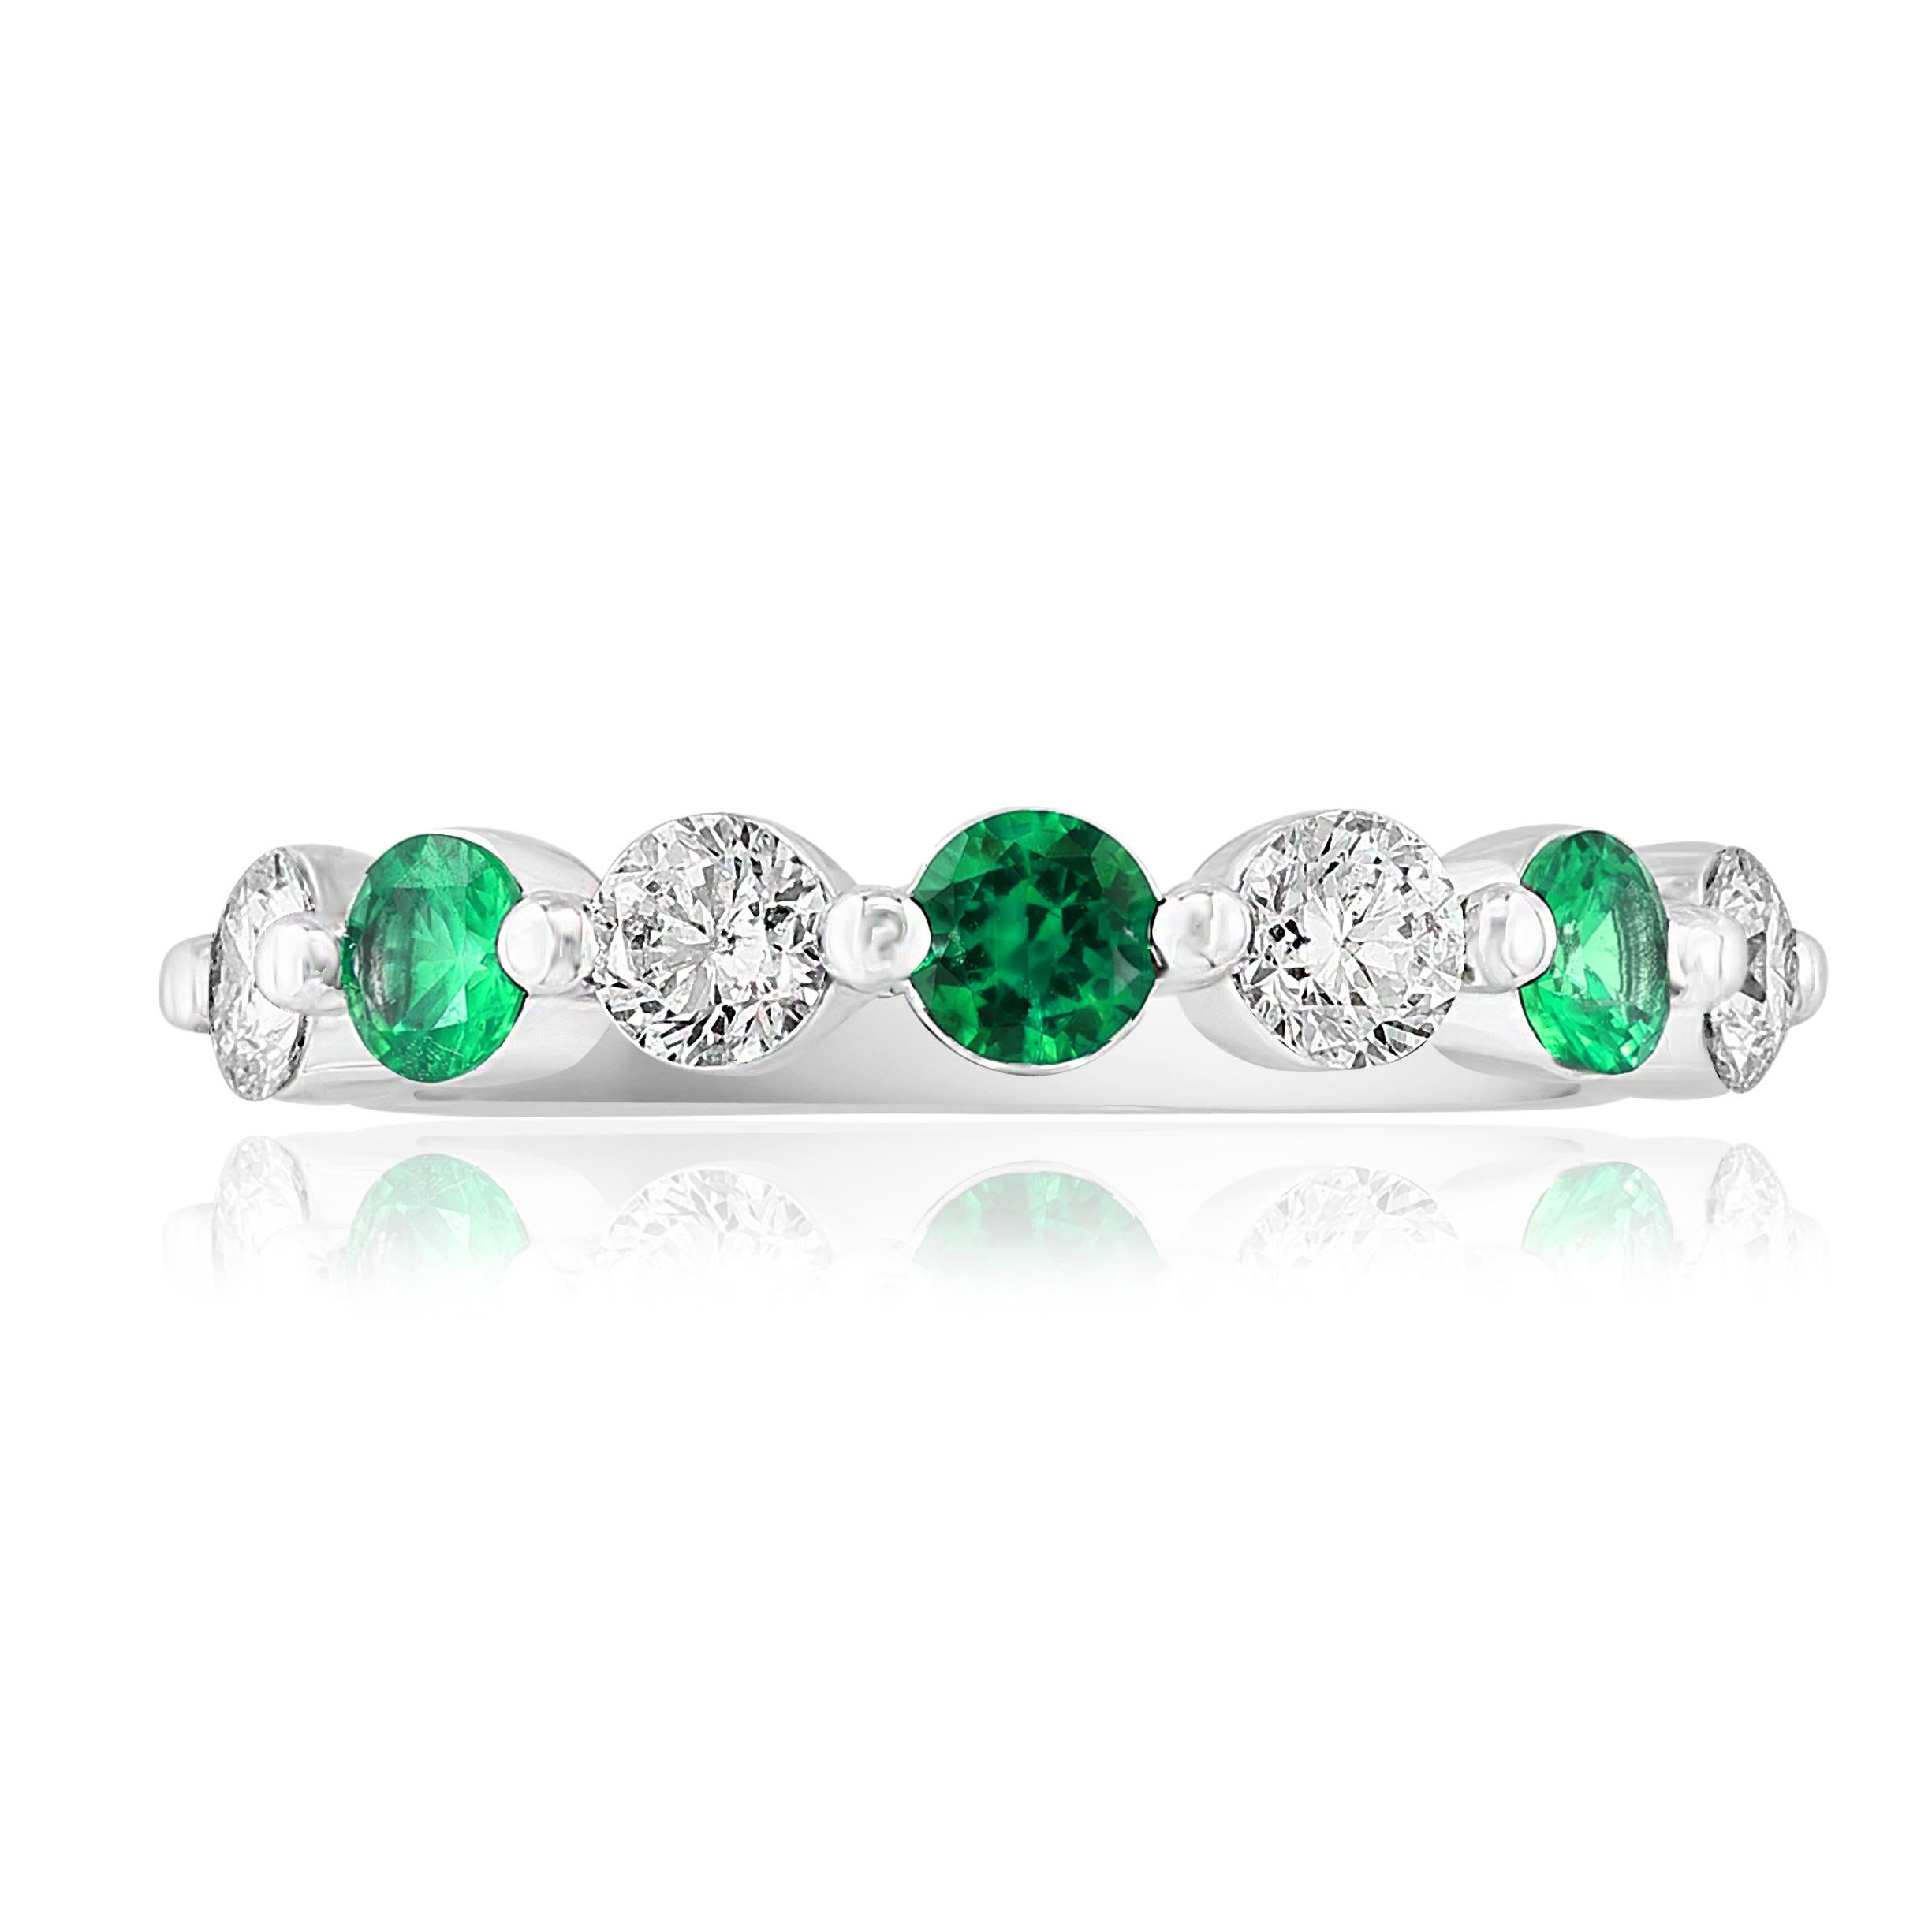 A fashionable and classic wedding band showcasing 4 brilliant cut diamonds weighing 0.62 carats total alternating with 3 round emeralds weighing 0.35 carats. Stones secured with a shared prong setting made with 14K white gold. A versatile piece that